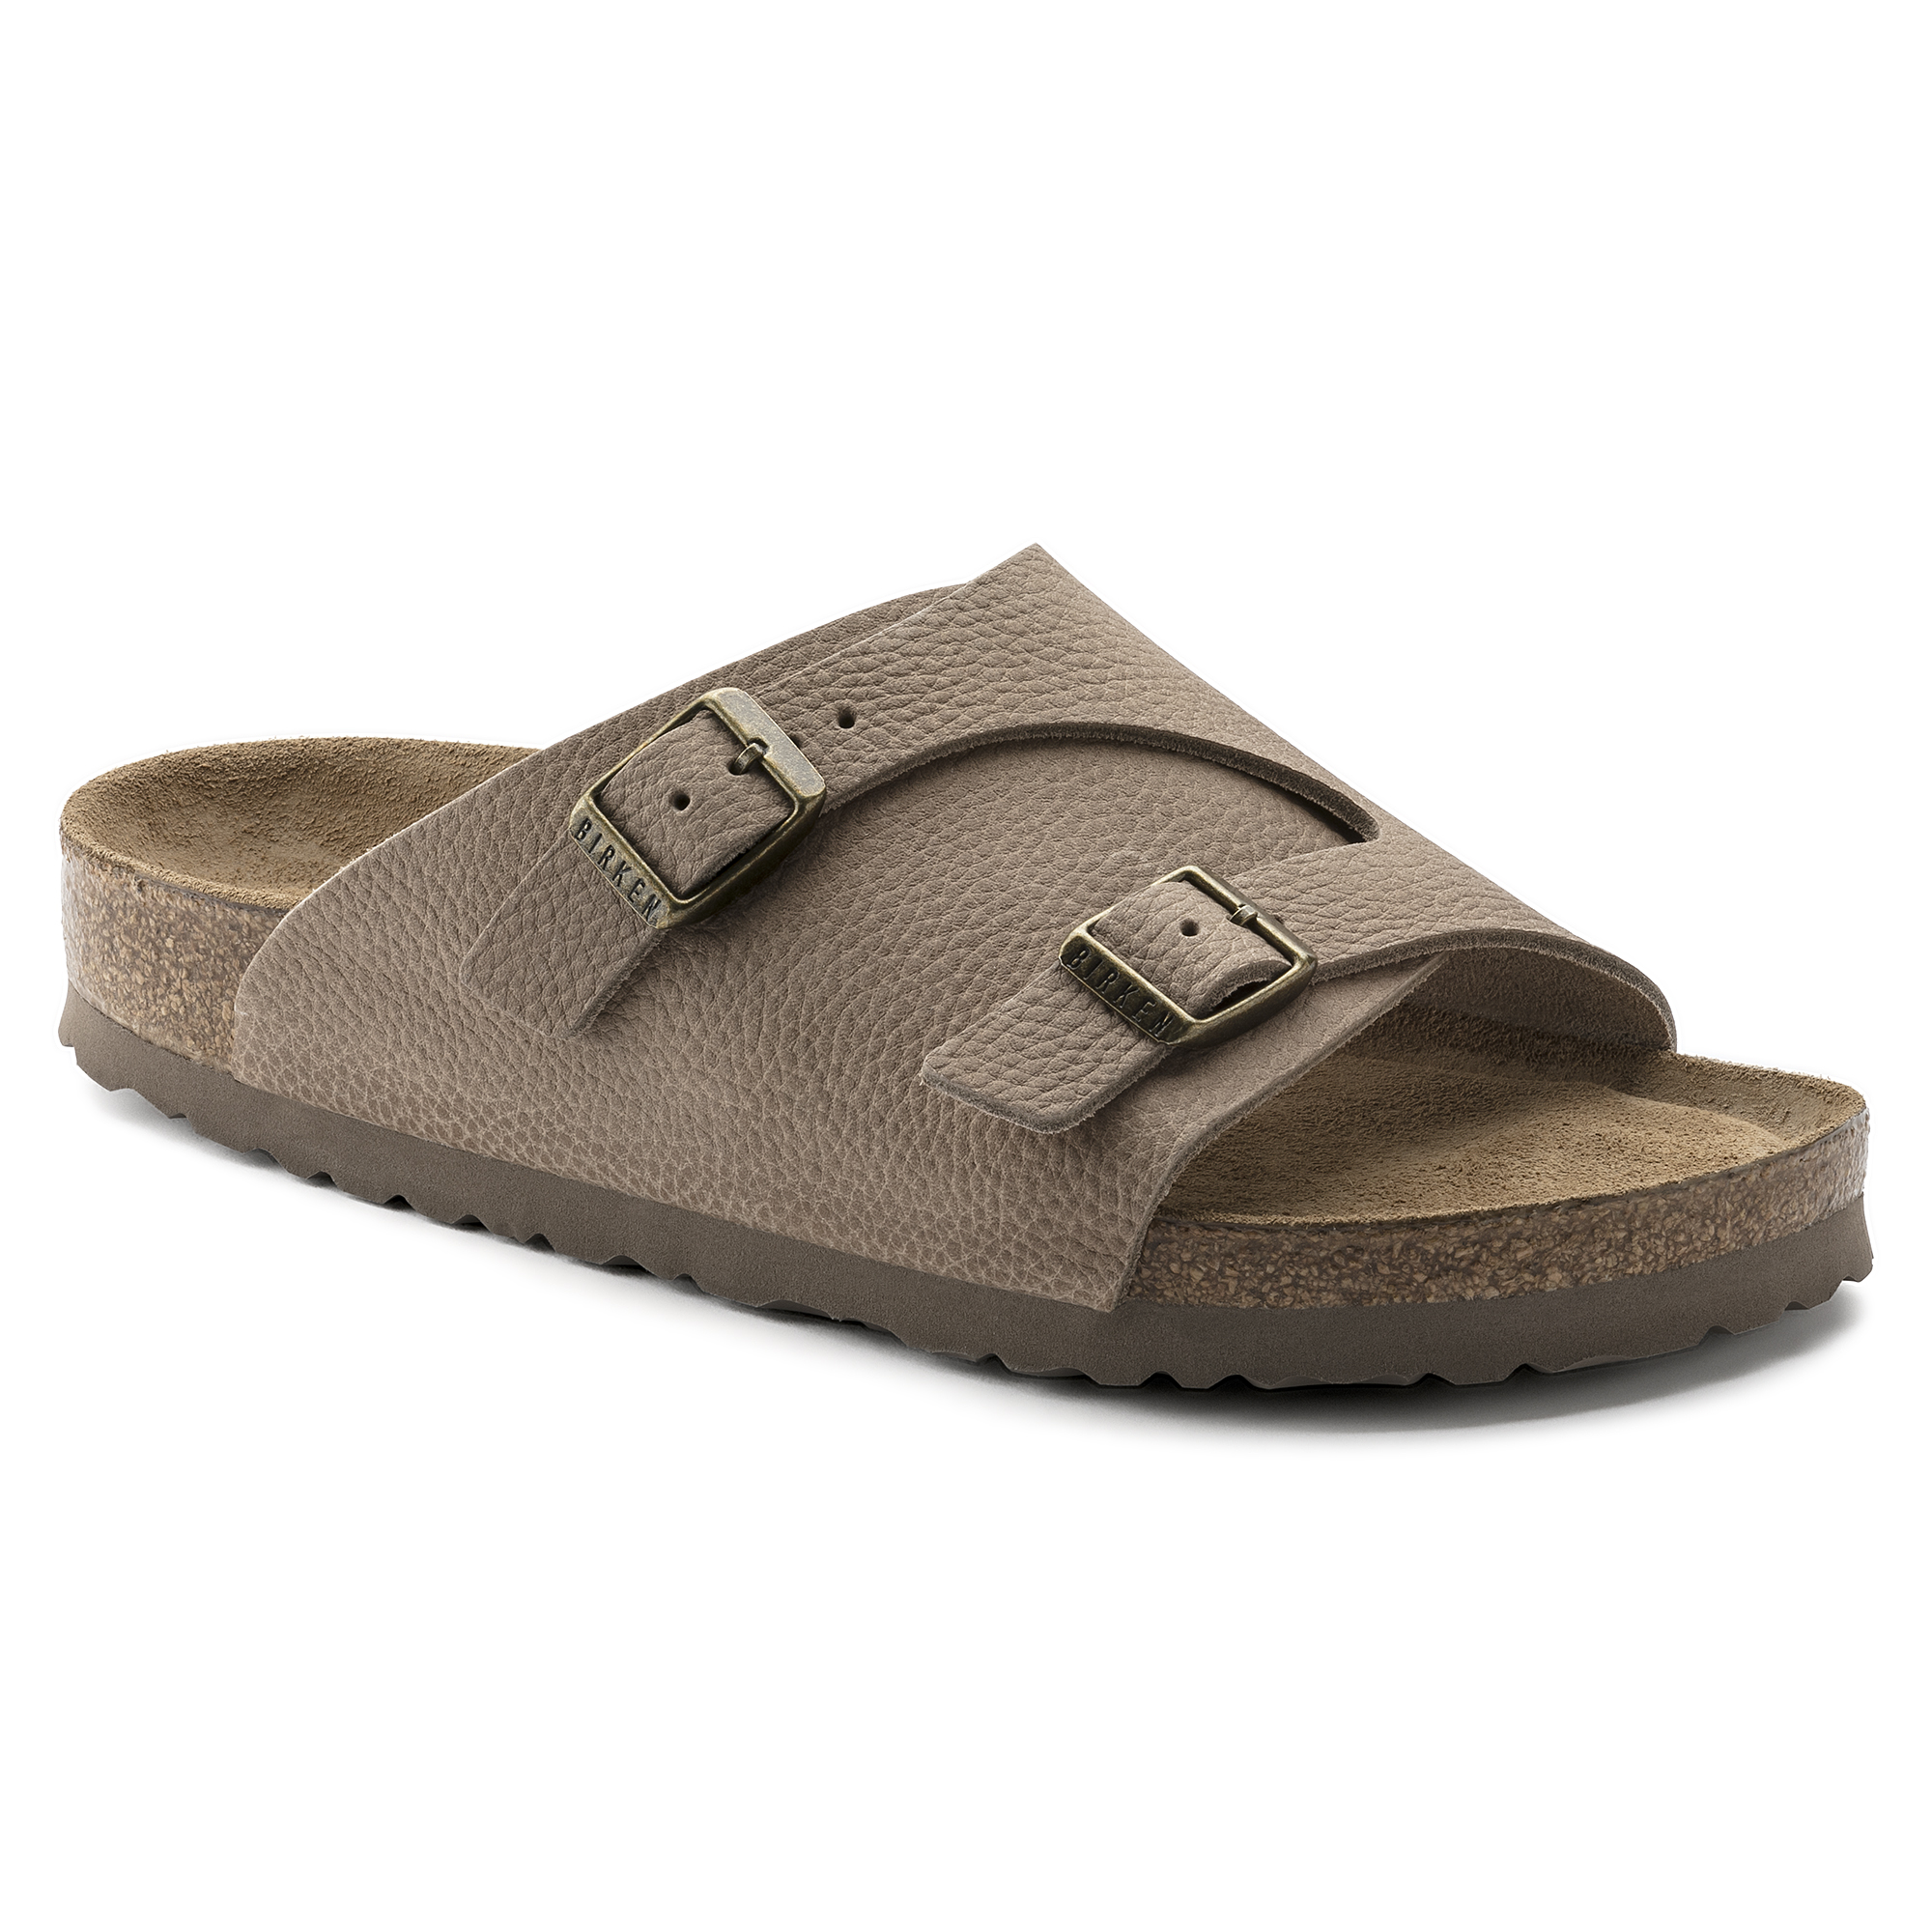 Zürich Soft Footbed / チューリッヒ ソフトフットベッド Real Leather